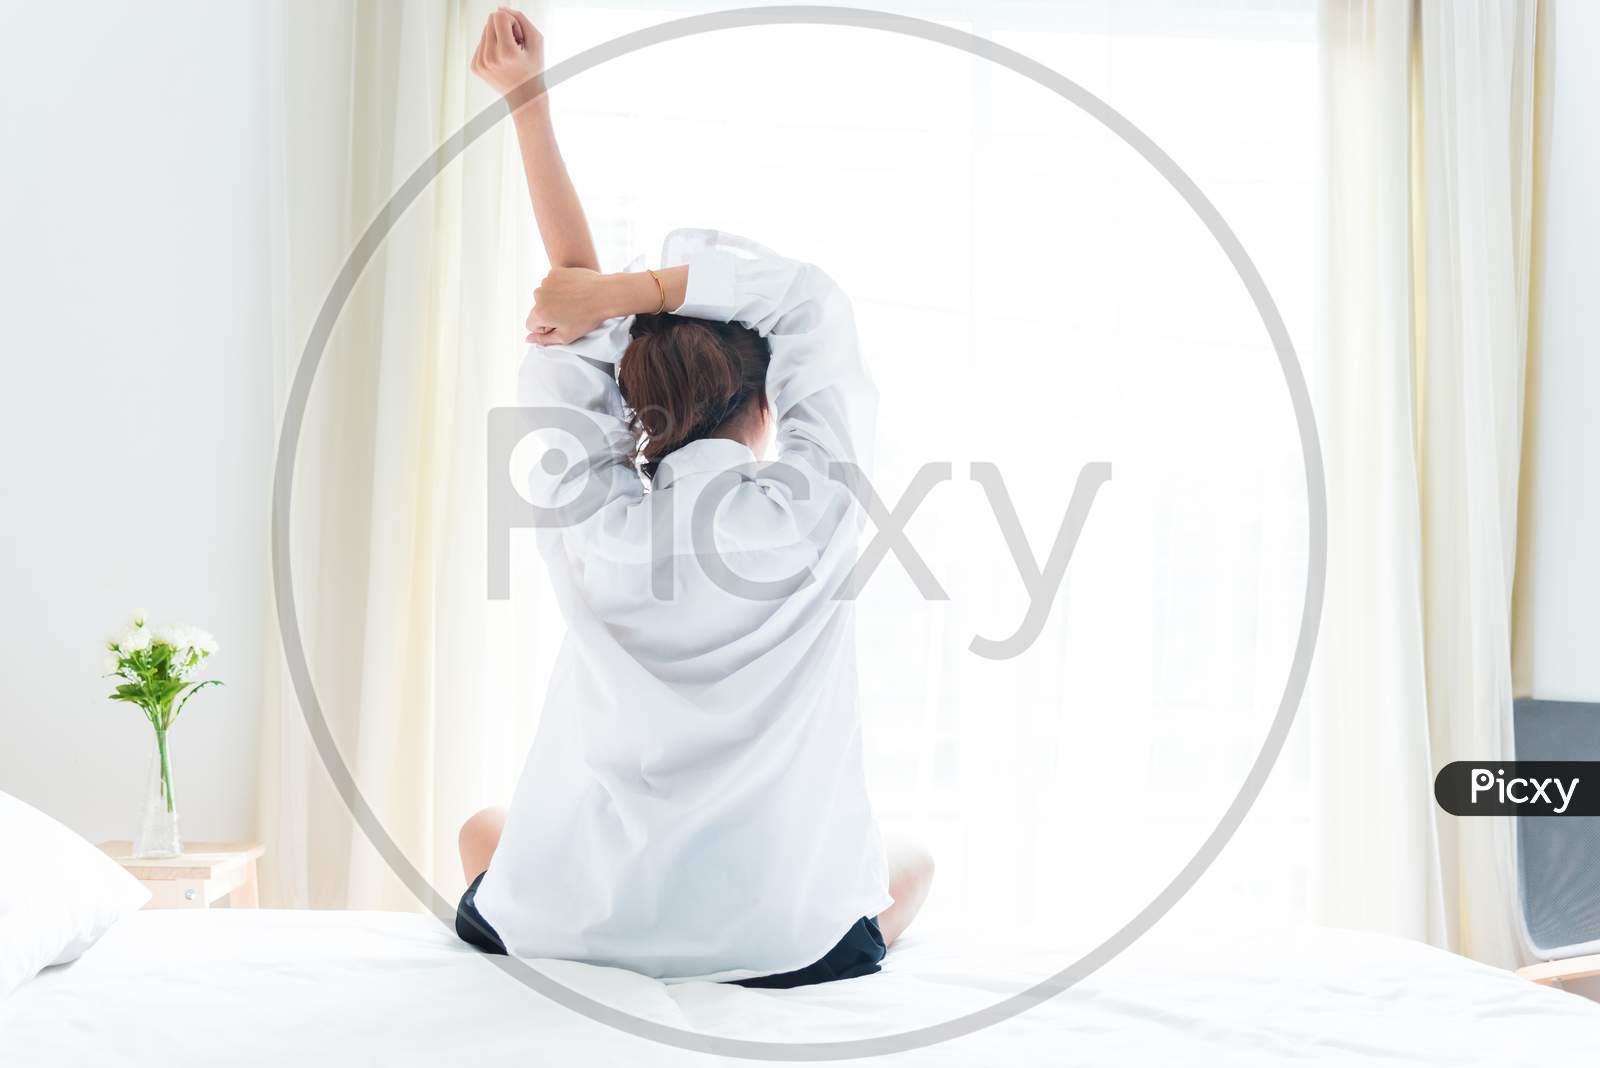 Back View Of Woman Stretching In Morning After Waking Up On Bed Near Window. Holiday And Relax Concept. Lazy Day And Working Day Concept. Office Woman And Worker In Daily Life Theme